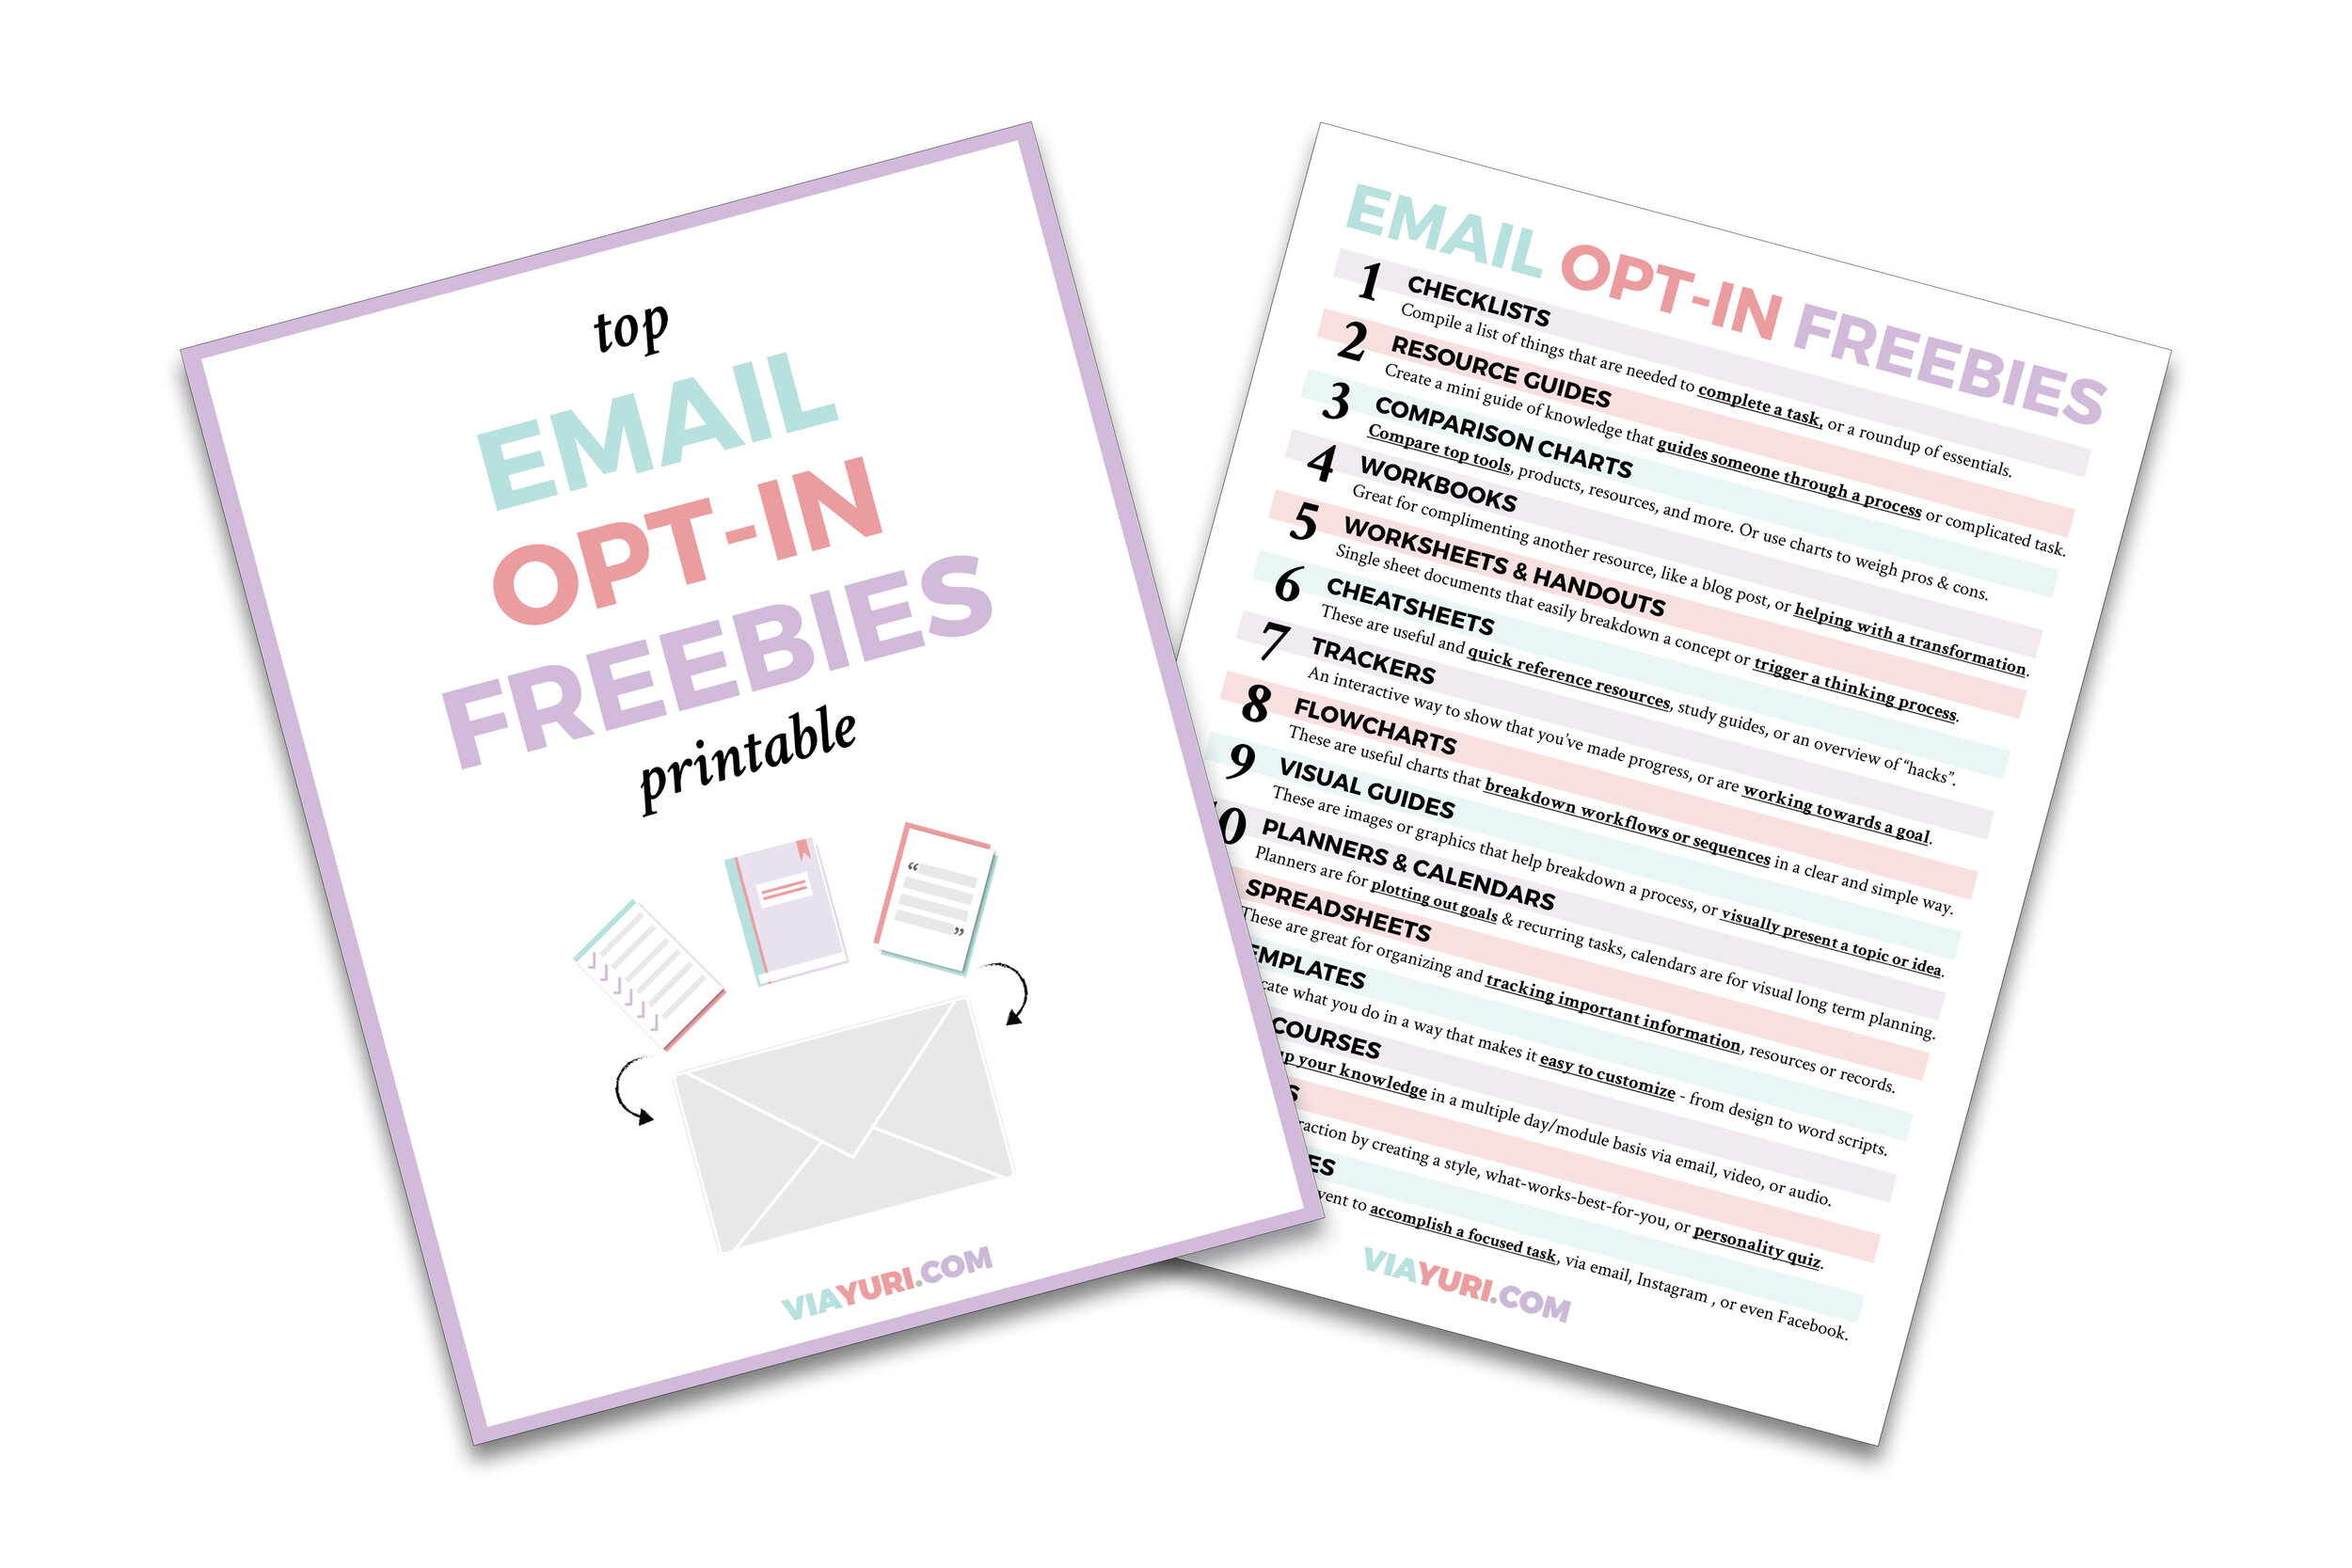 7 Opt-In Freebie Ideas to Grow Your Email List Like Crazy